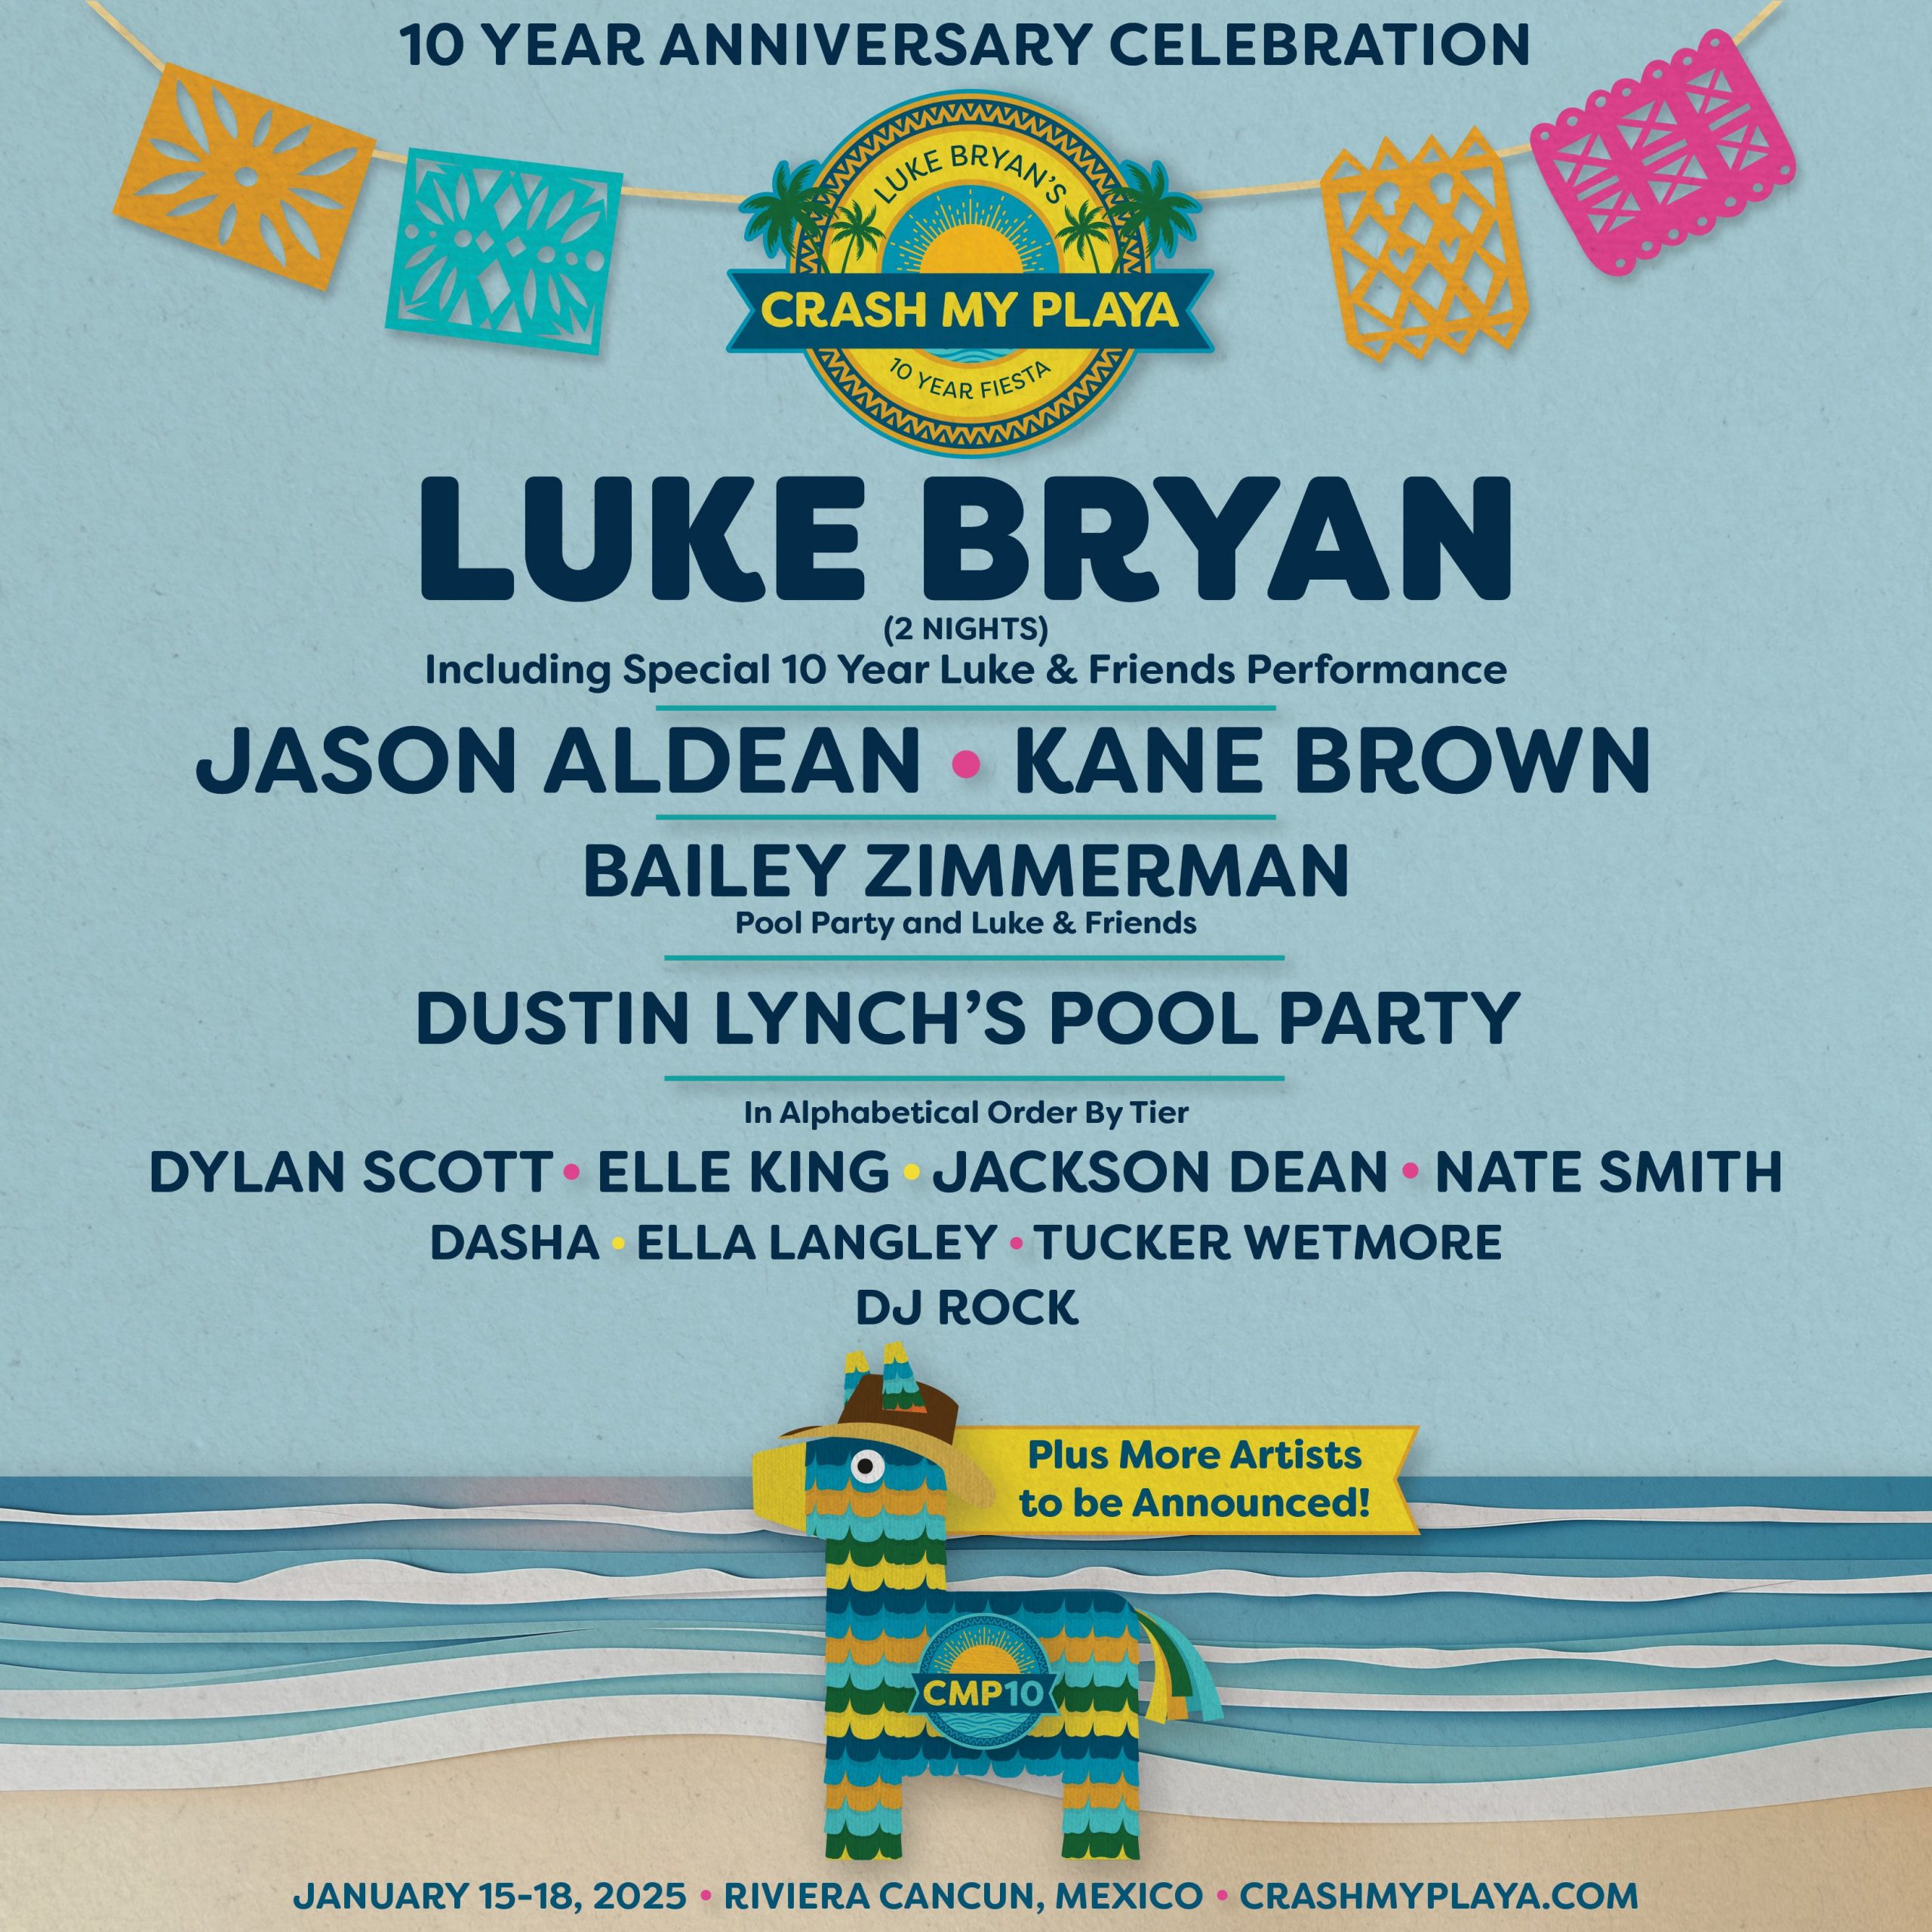 Luke Bryan’s Crash My Playa Marks 10 Years with Star-Studded Lineup and Festival Experience